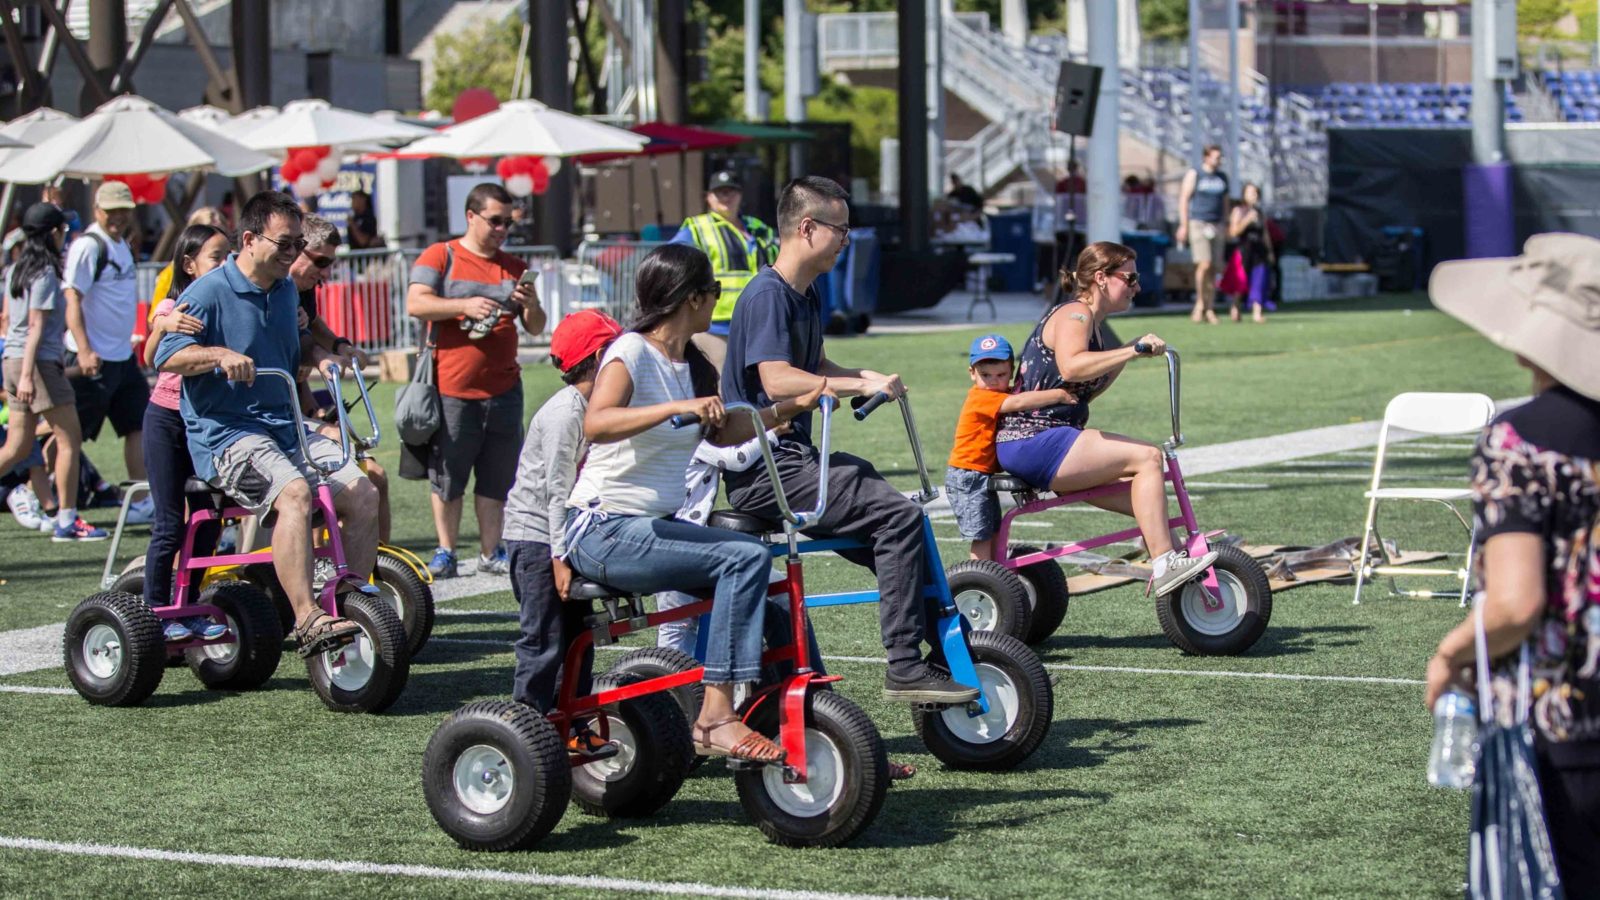 giant tricycle race at a company picnic